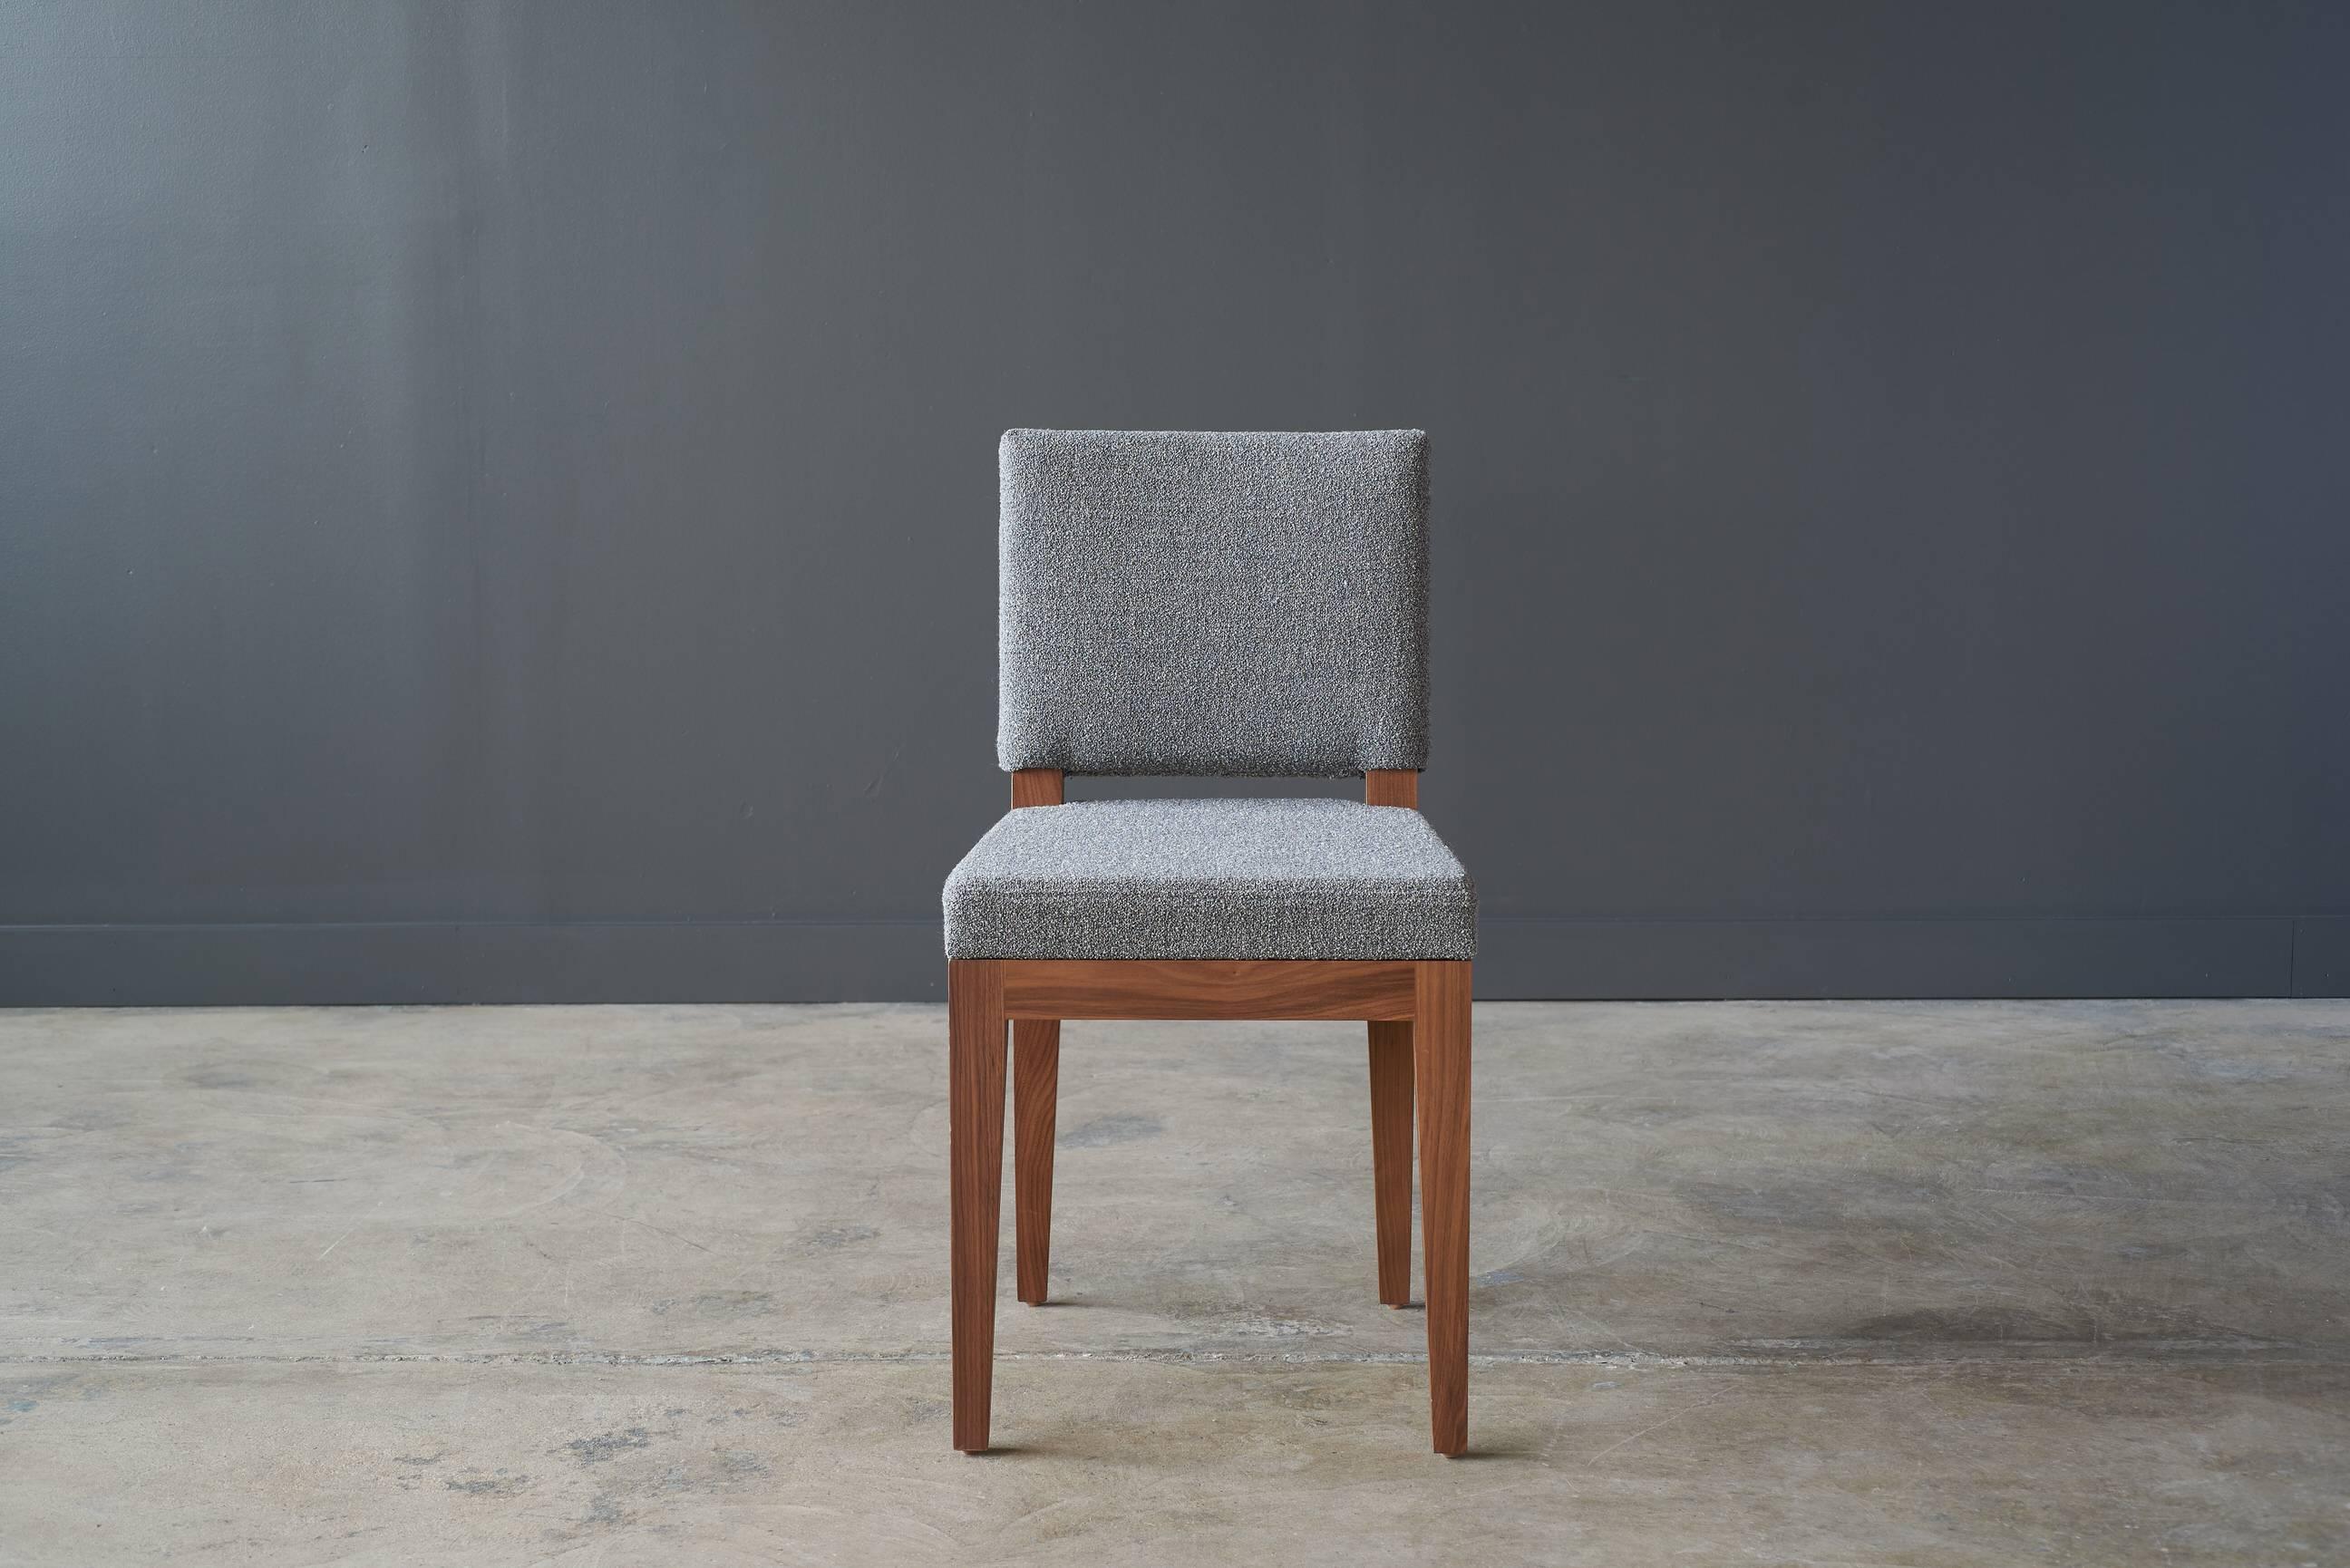 Shown in Natural Walnut and Kvadrat Outback 121
Measure: 17in x 20.5in x 32in H.

Each Desiron piece is handcrafted in the U.S.A., fully customizable and available in a variety of finishes.